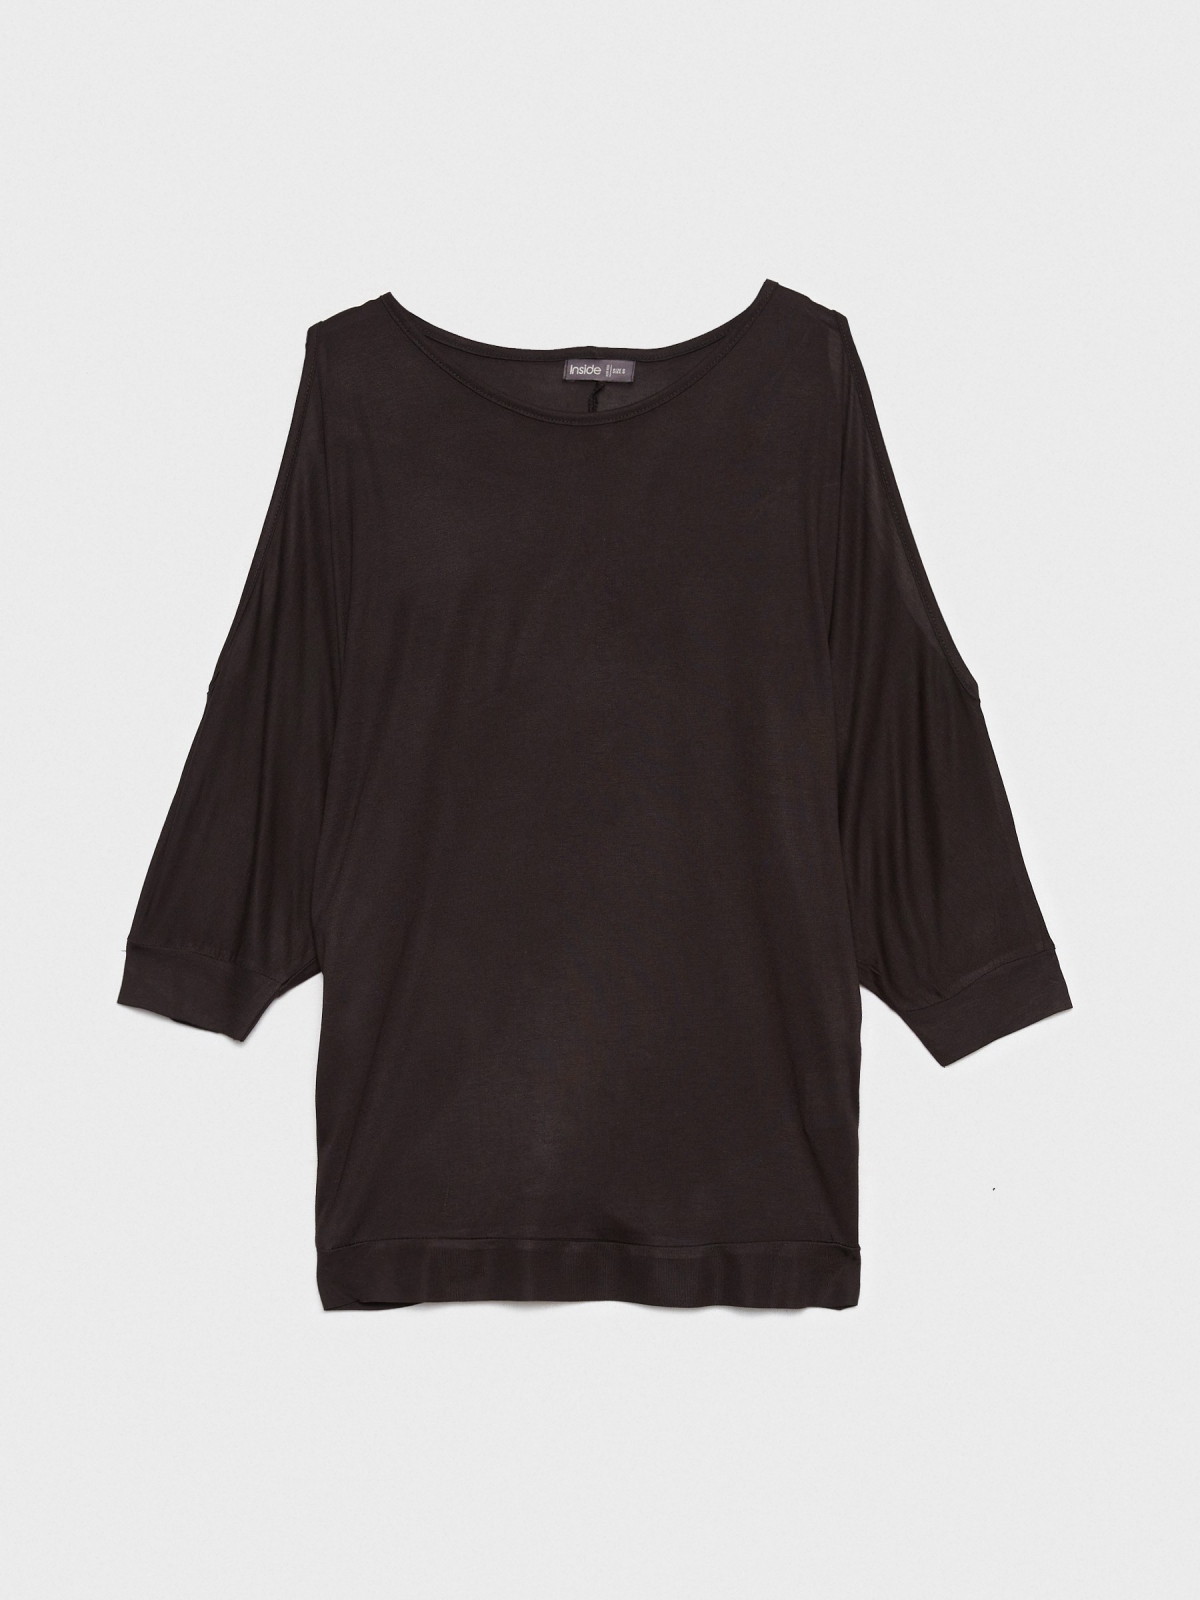  Fluid T-shirt with open sleeves black